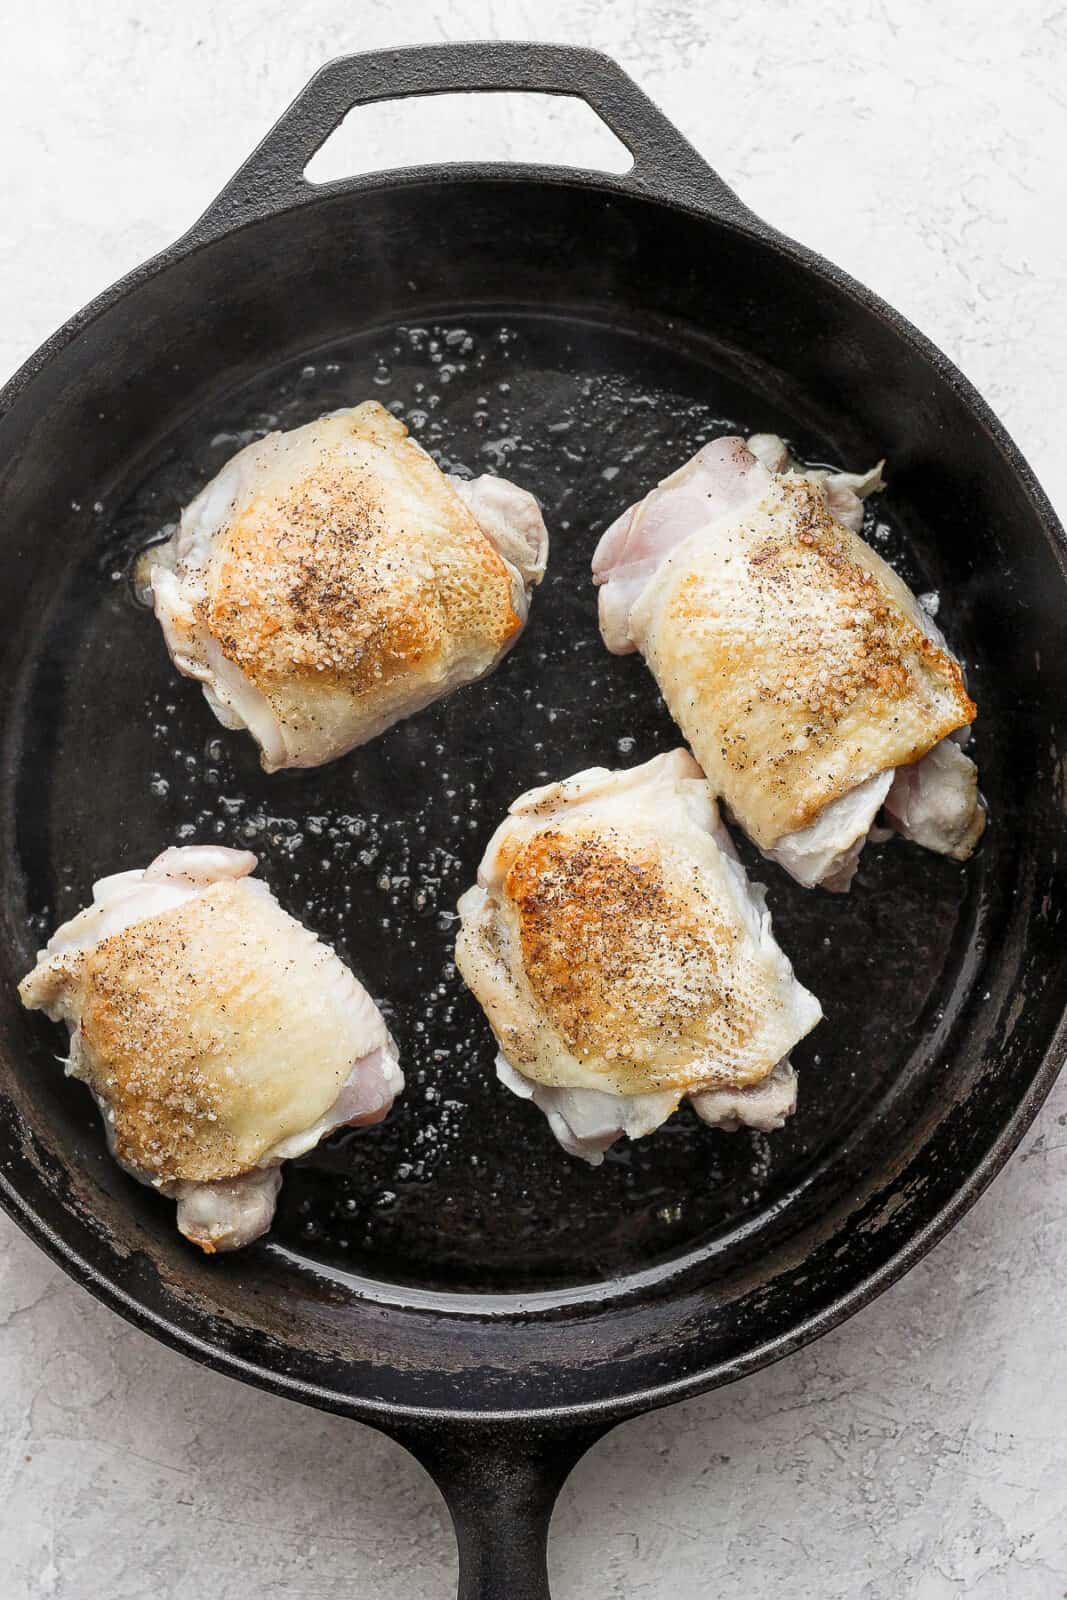 Chicken thighs searing in a cast iron skillet.